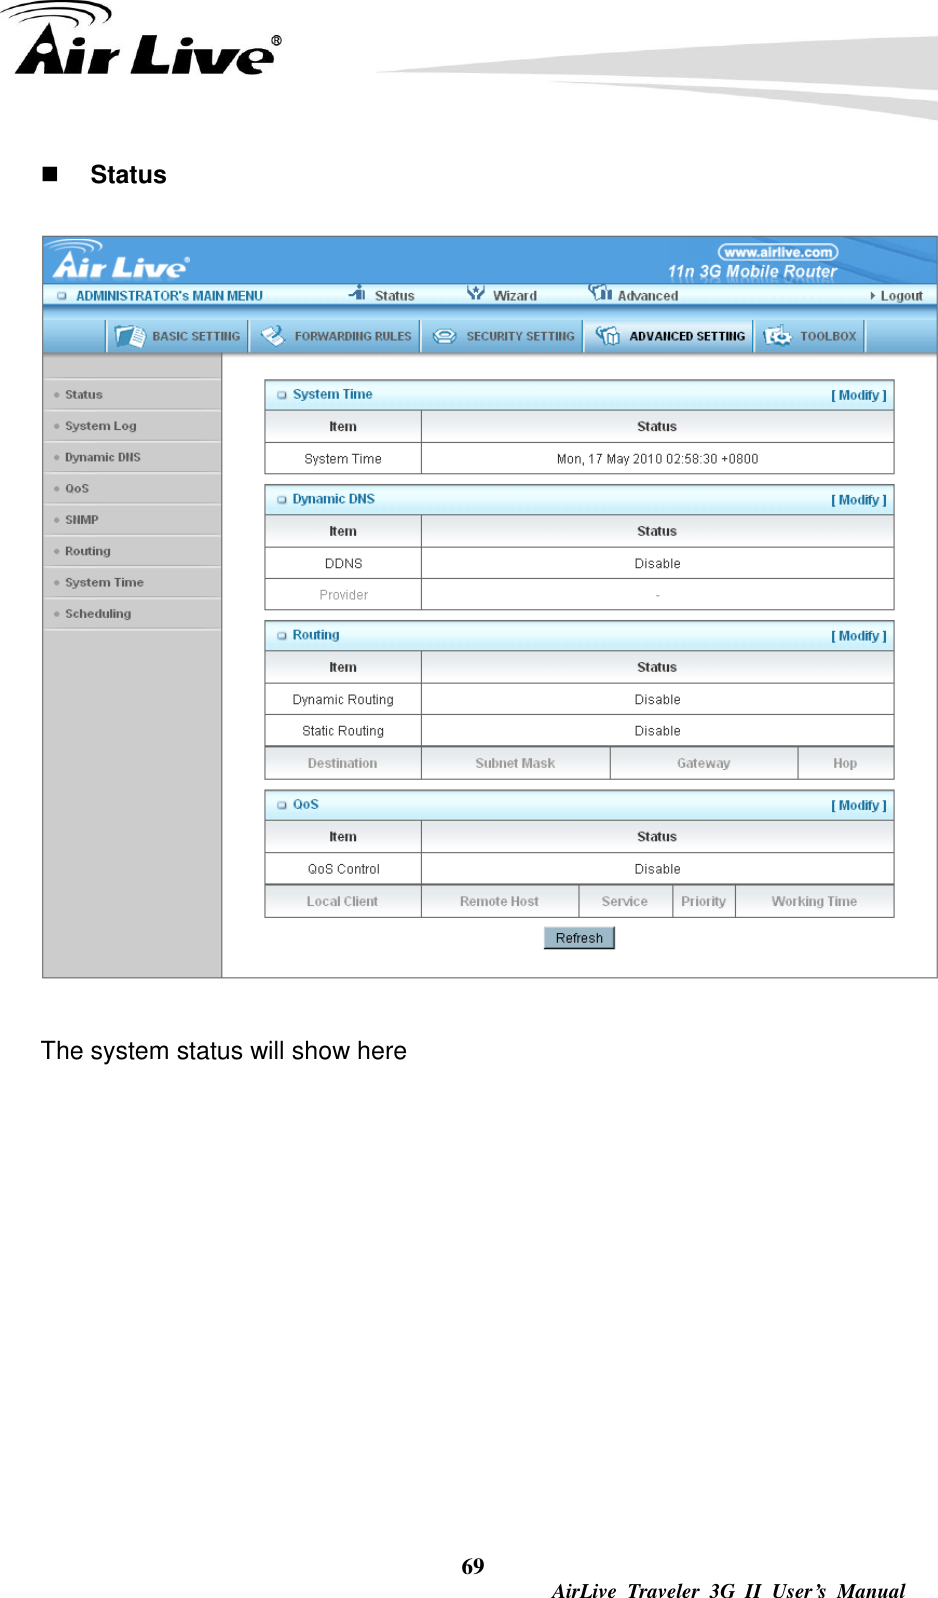  69  AirLive  Traveler  3G  II  User’s  Manual  Status  The system status will show here        